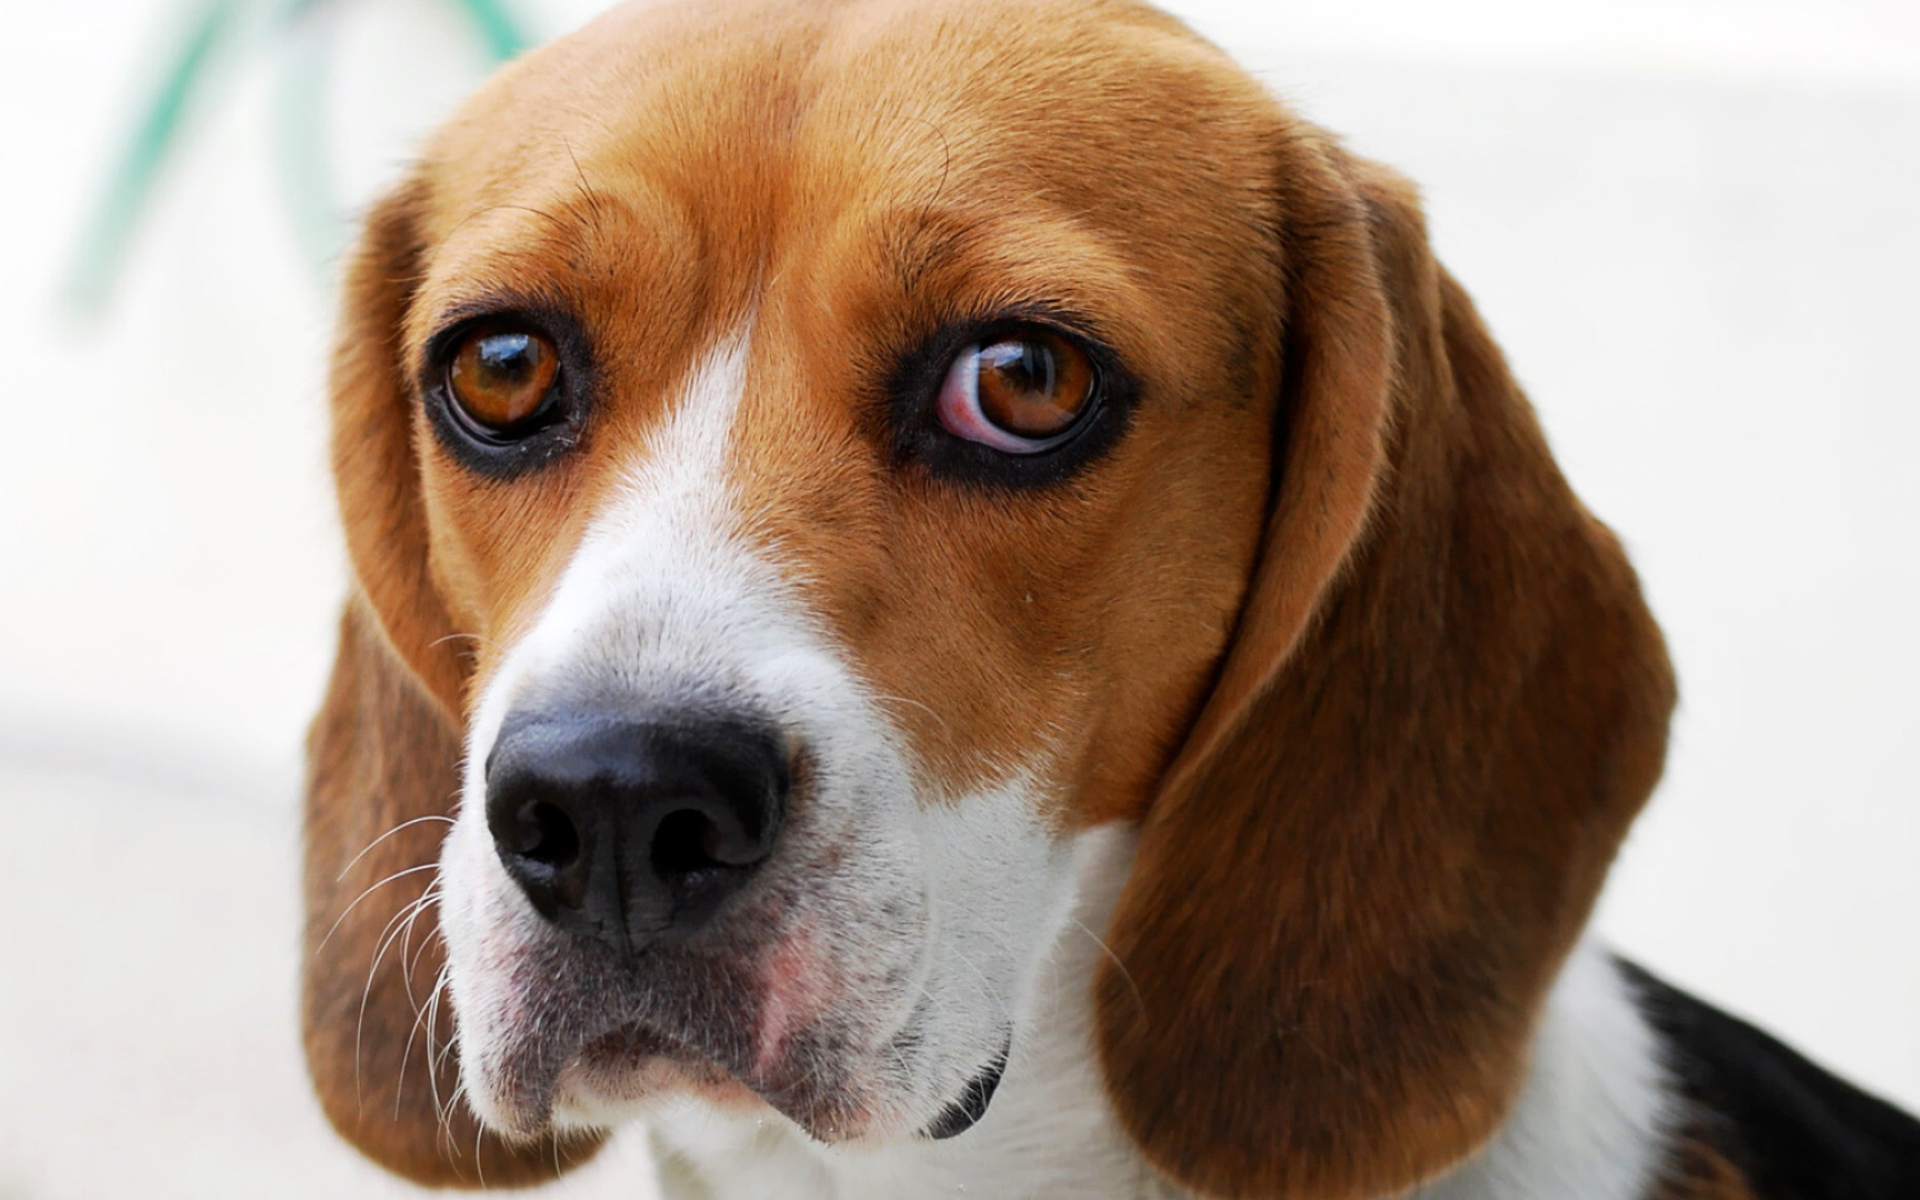 Beagle: The breed used in pet therapy, visiting the sick and elderly in hospital. 1920x1200 HD Wallpaper.